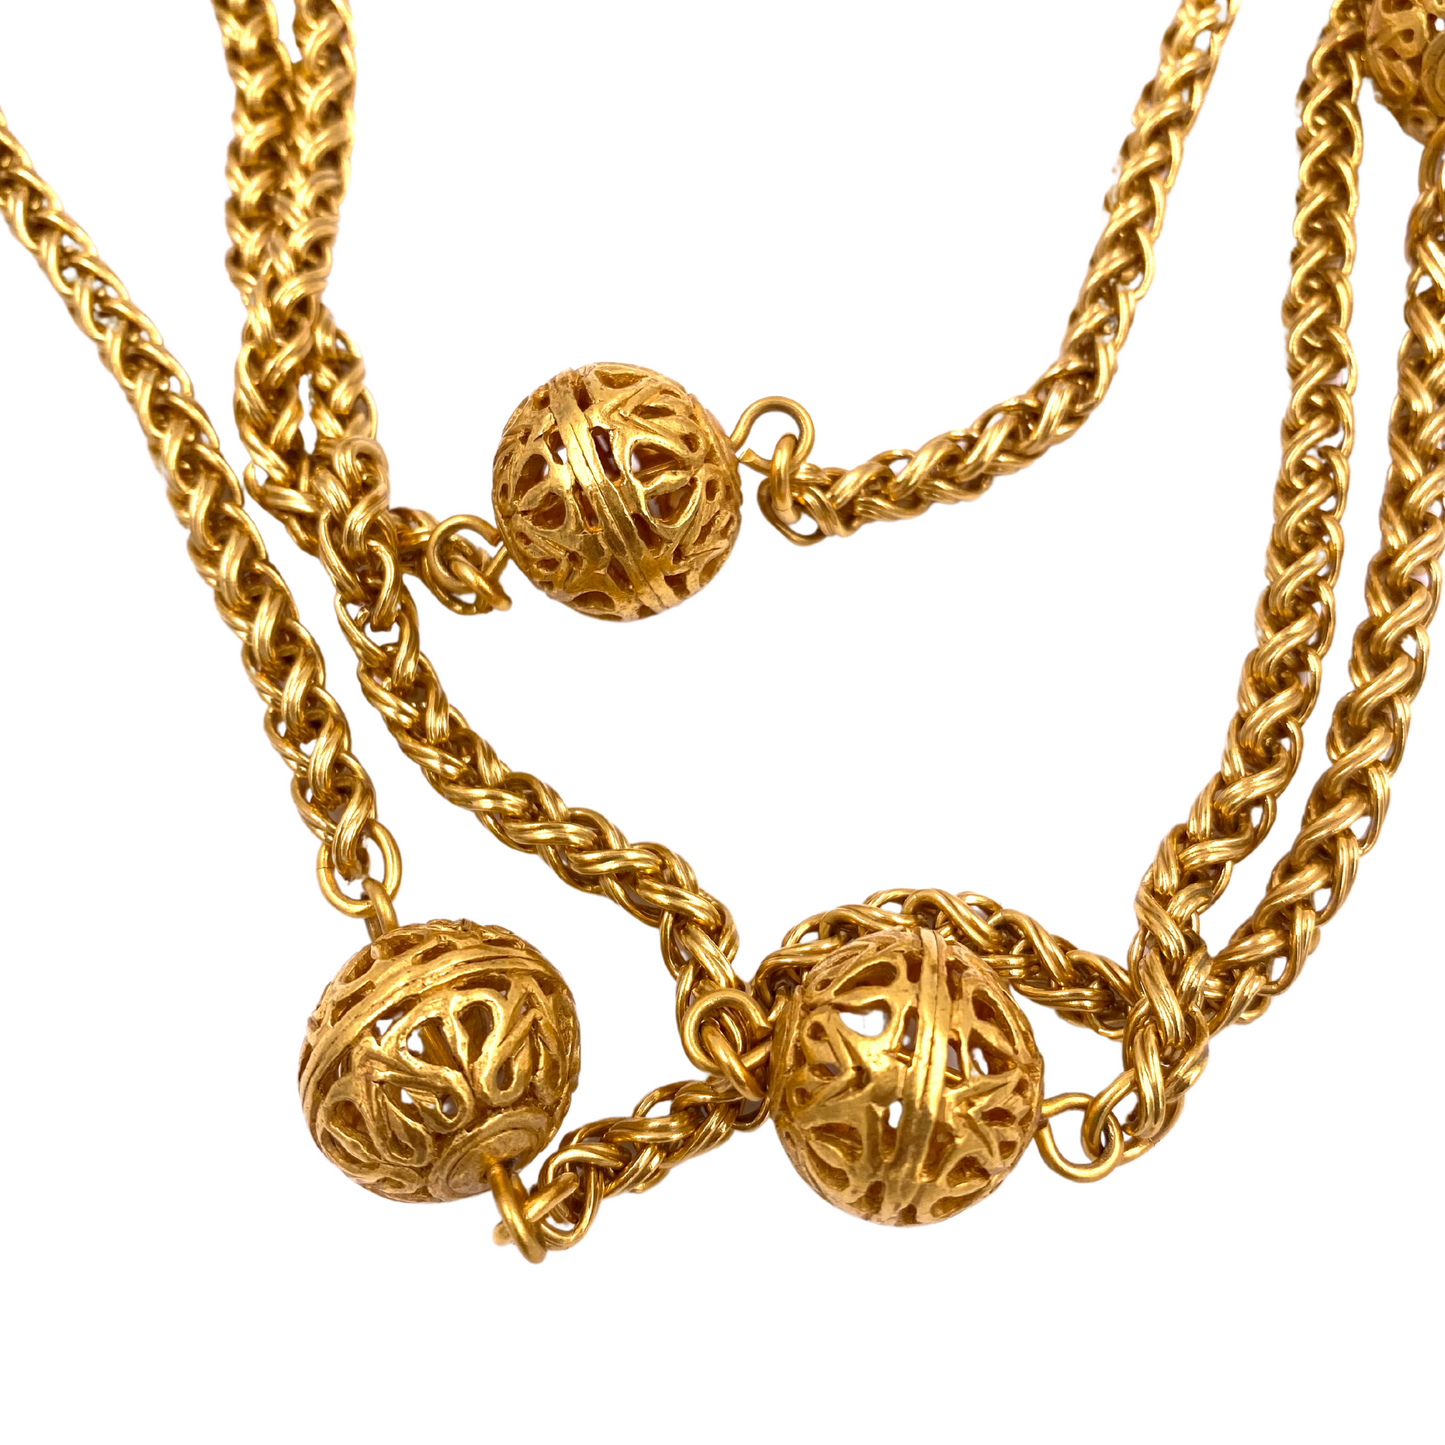 Chanel 1995 Gold Long Chain with Filigree Balls